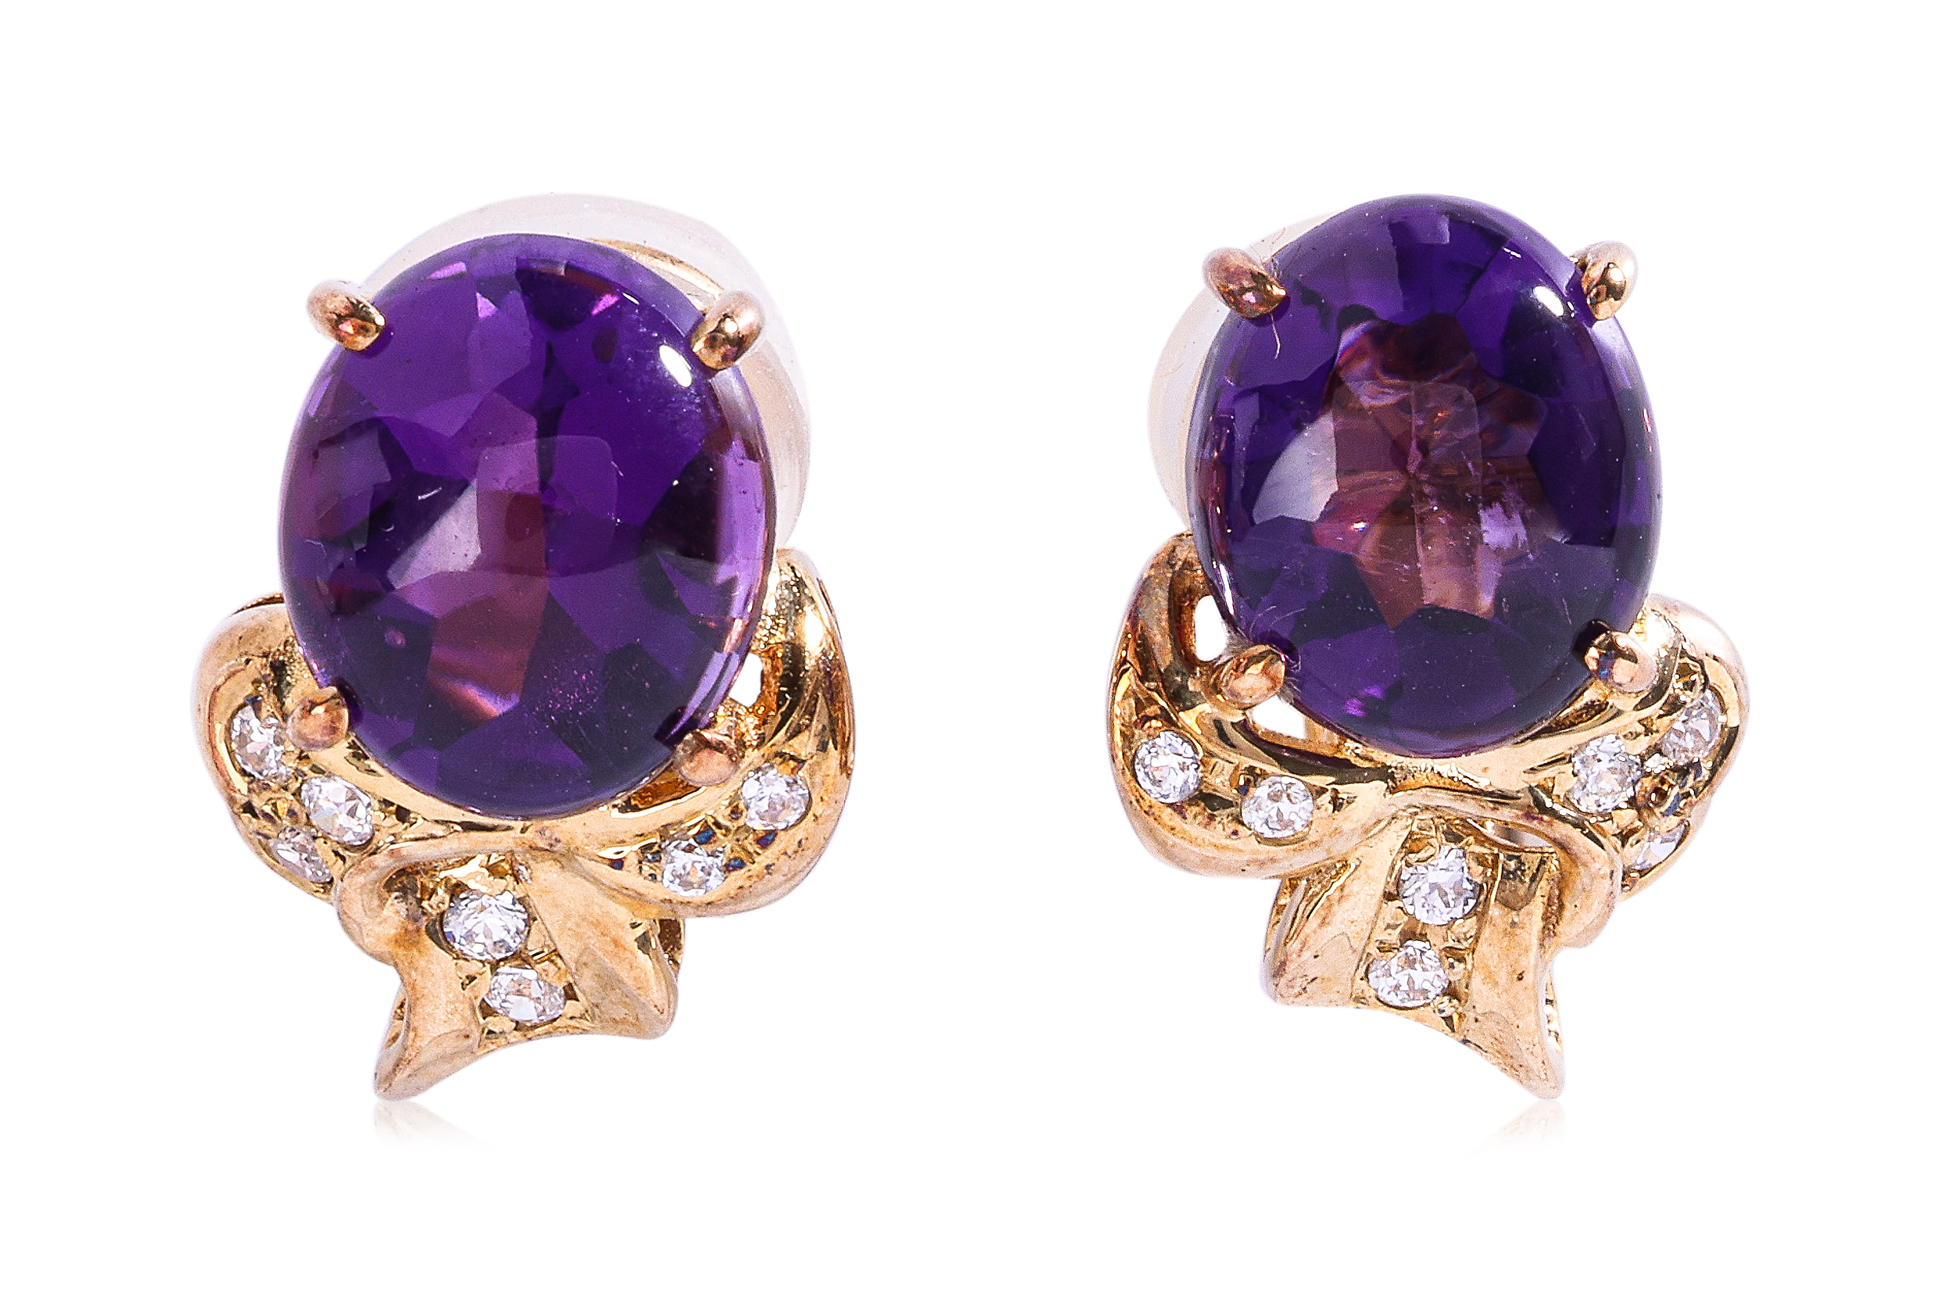 A PAIR OF AMETHYST CLIP EARRINGS AND AN AMETHYST RING - Image 3 of 5